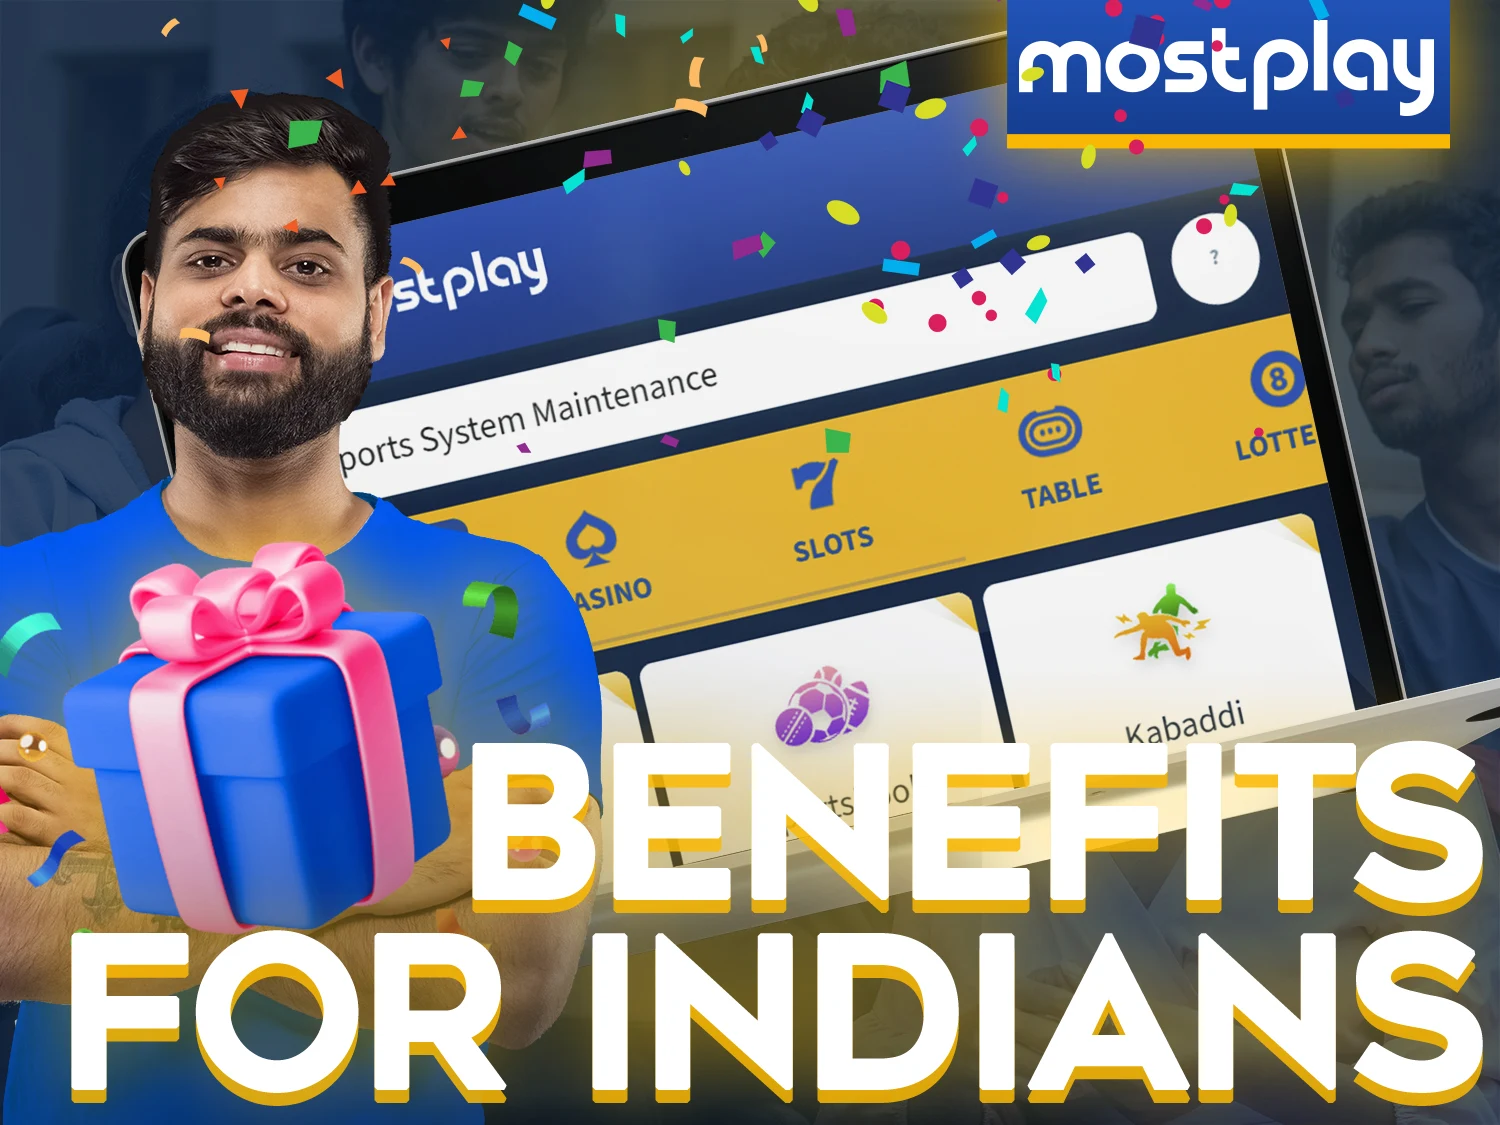 Get additional bonuses if you bet from India at the Mostplay.